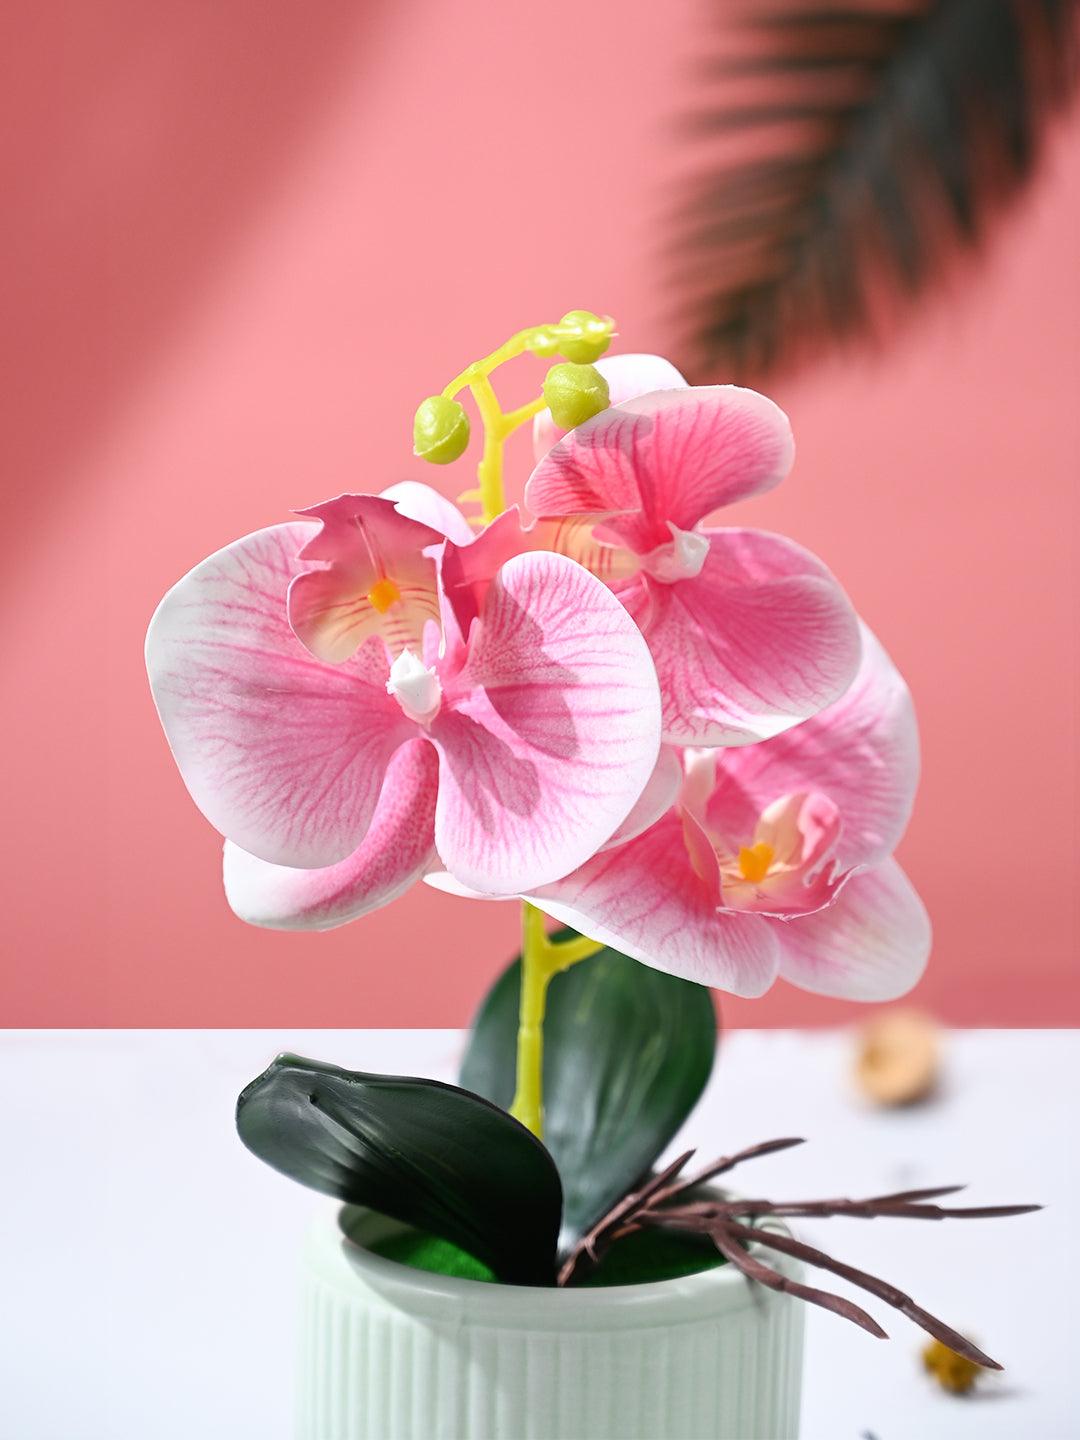 Orchid Flowers With Lightgreen Pot - MARKET99